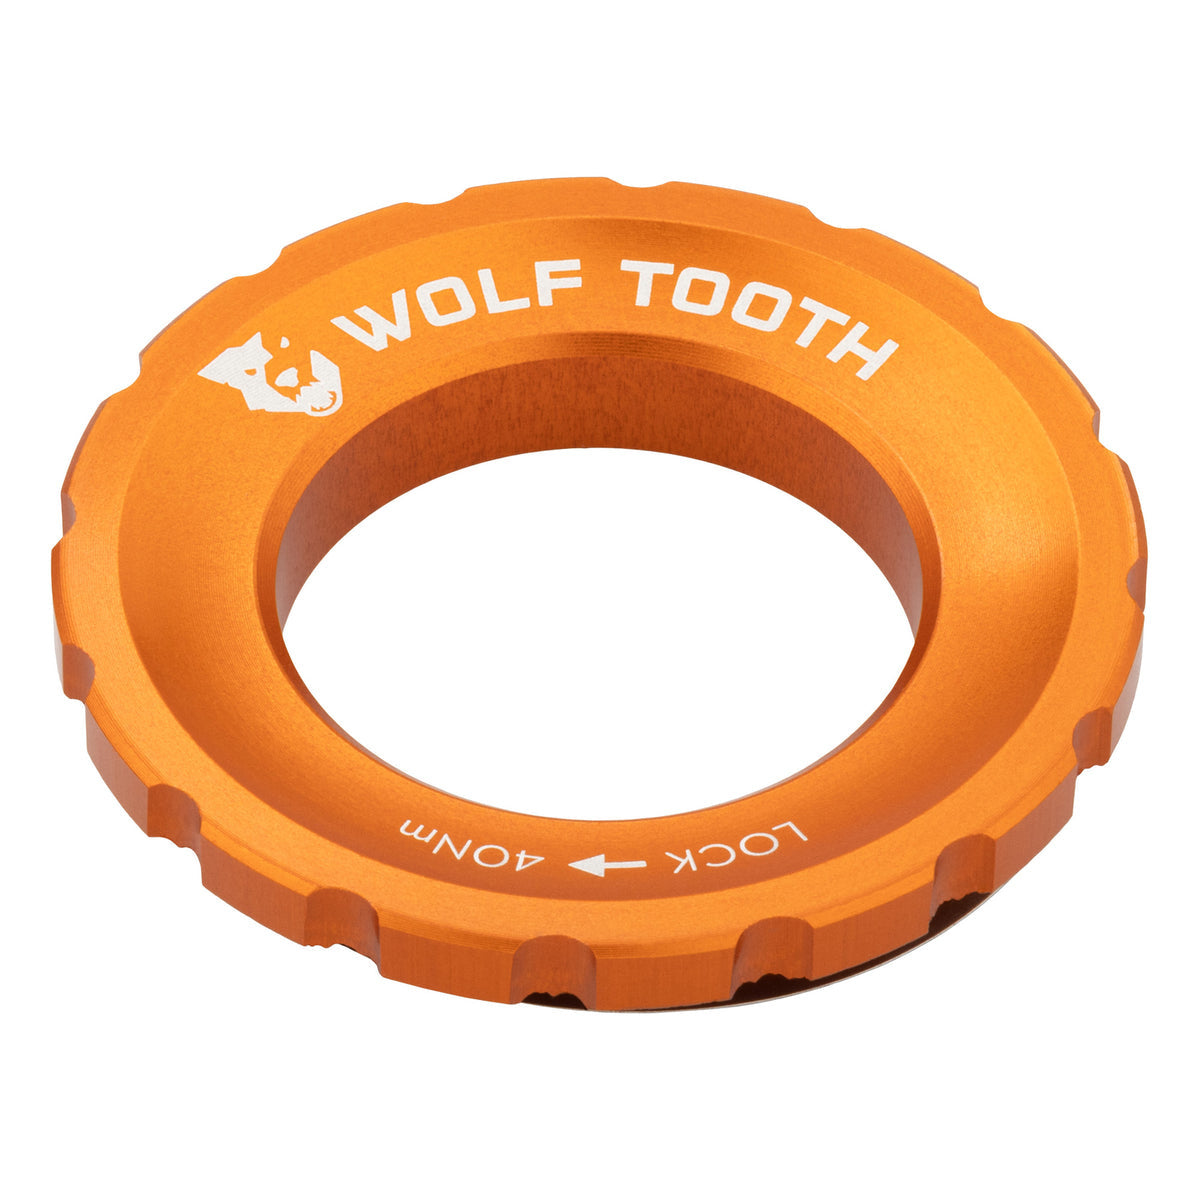 Centerlock Rotor Lockring - Wolf Tooth Components